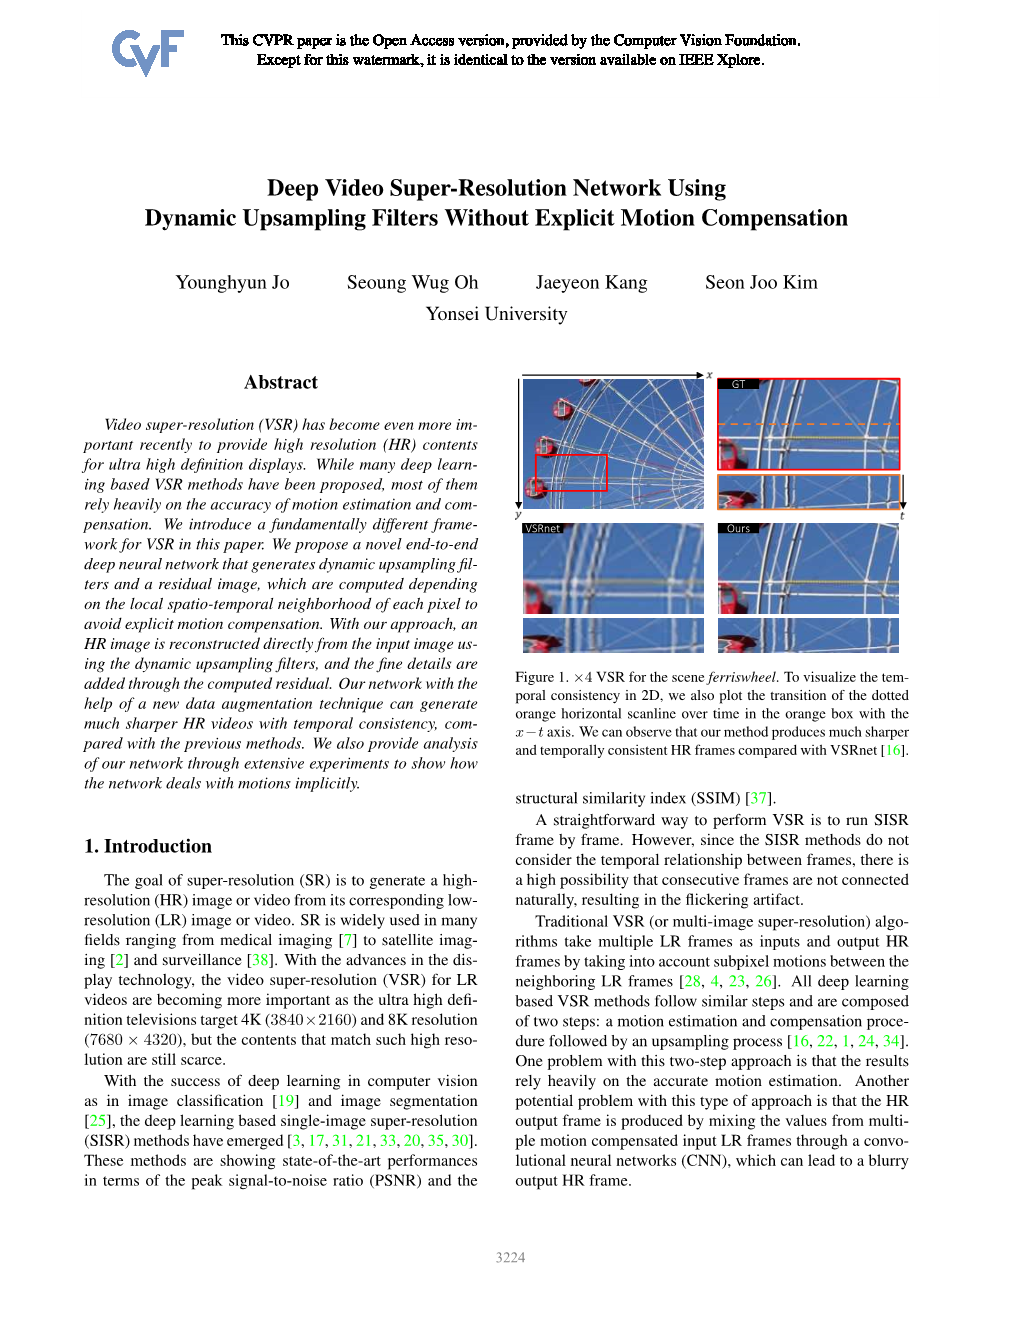 Deep Video Super-Resolution Network Using Dynamic Upsampling Filters Without Explicit Motion Compensation